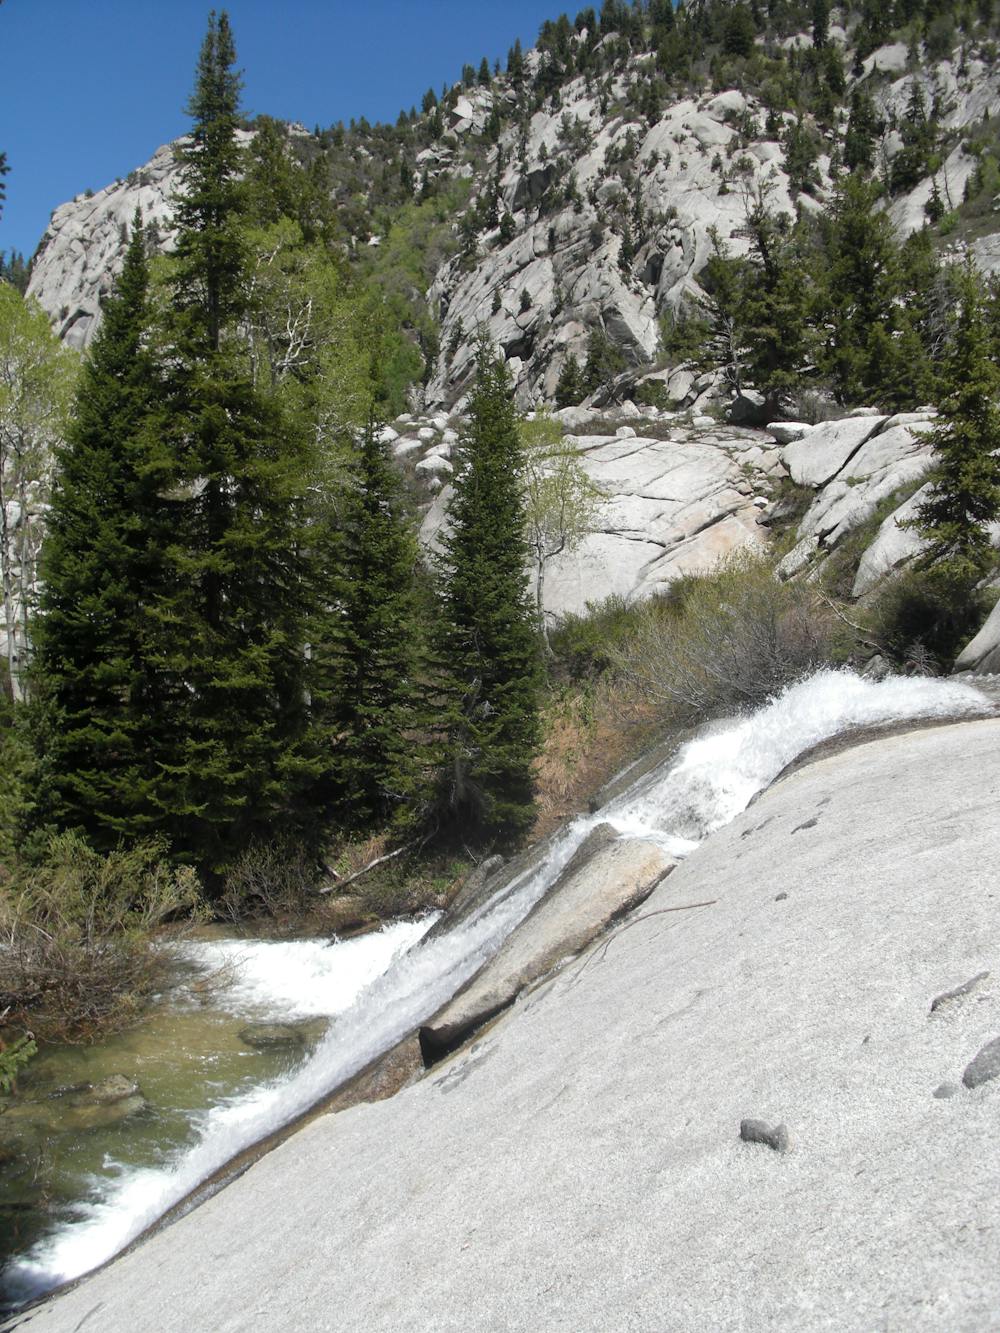 The meadow above the Upper Falls in Bells Canyon